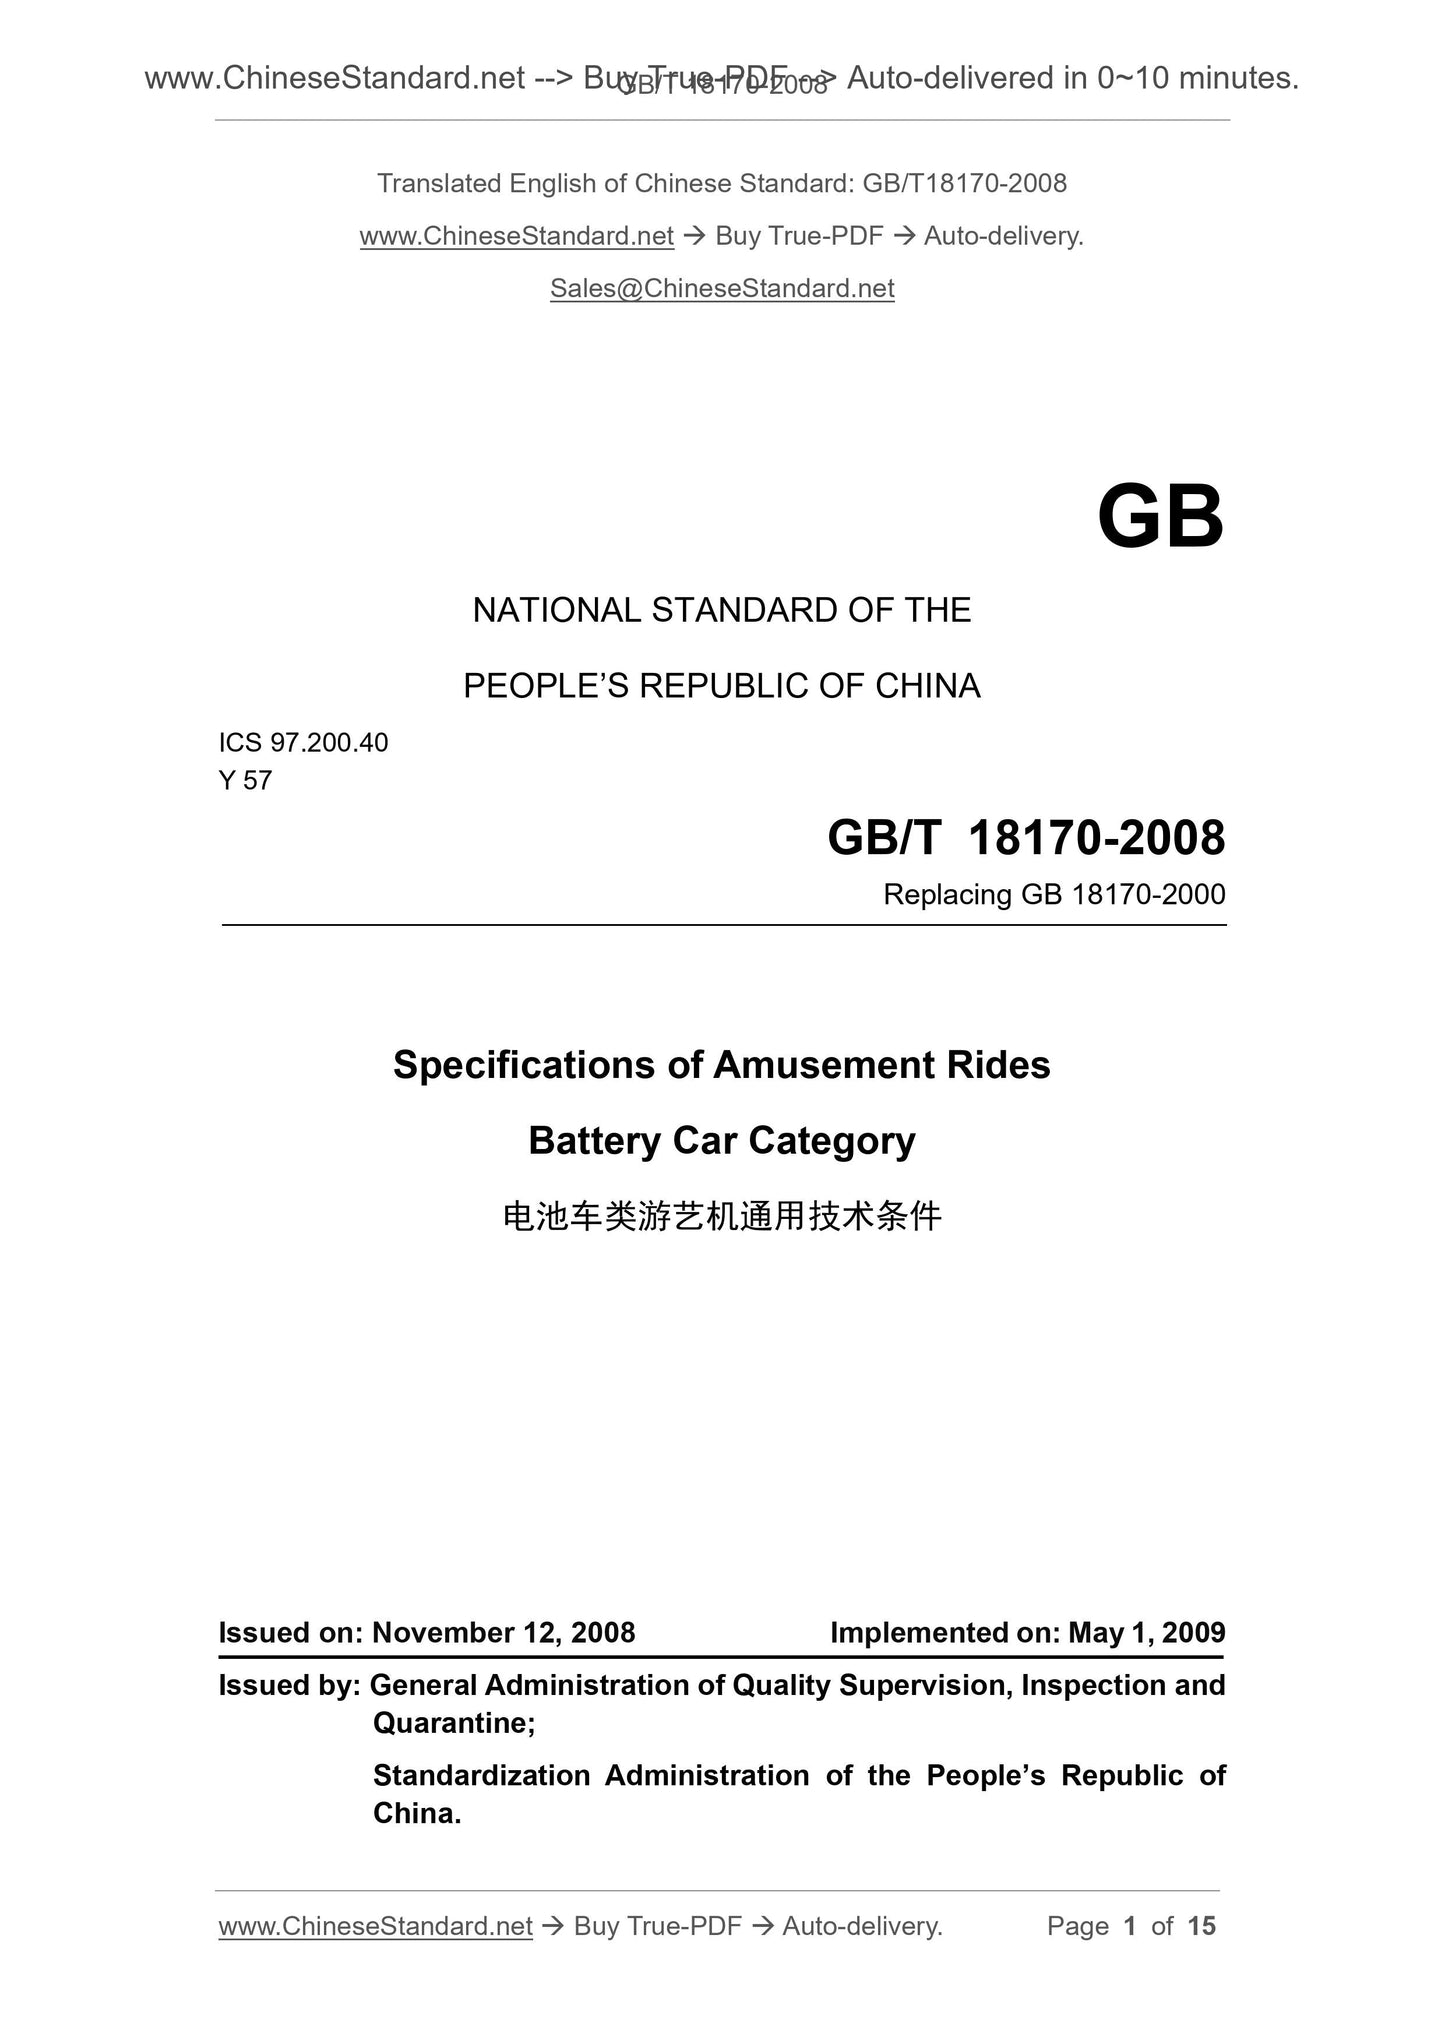 GB/T 18170-2008 Page 1